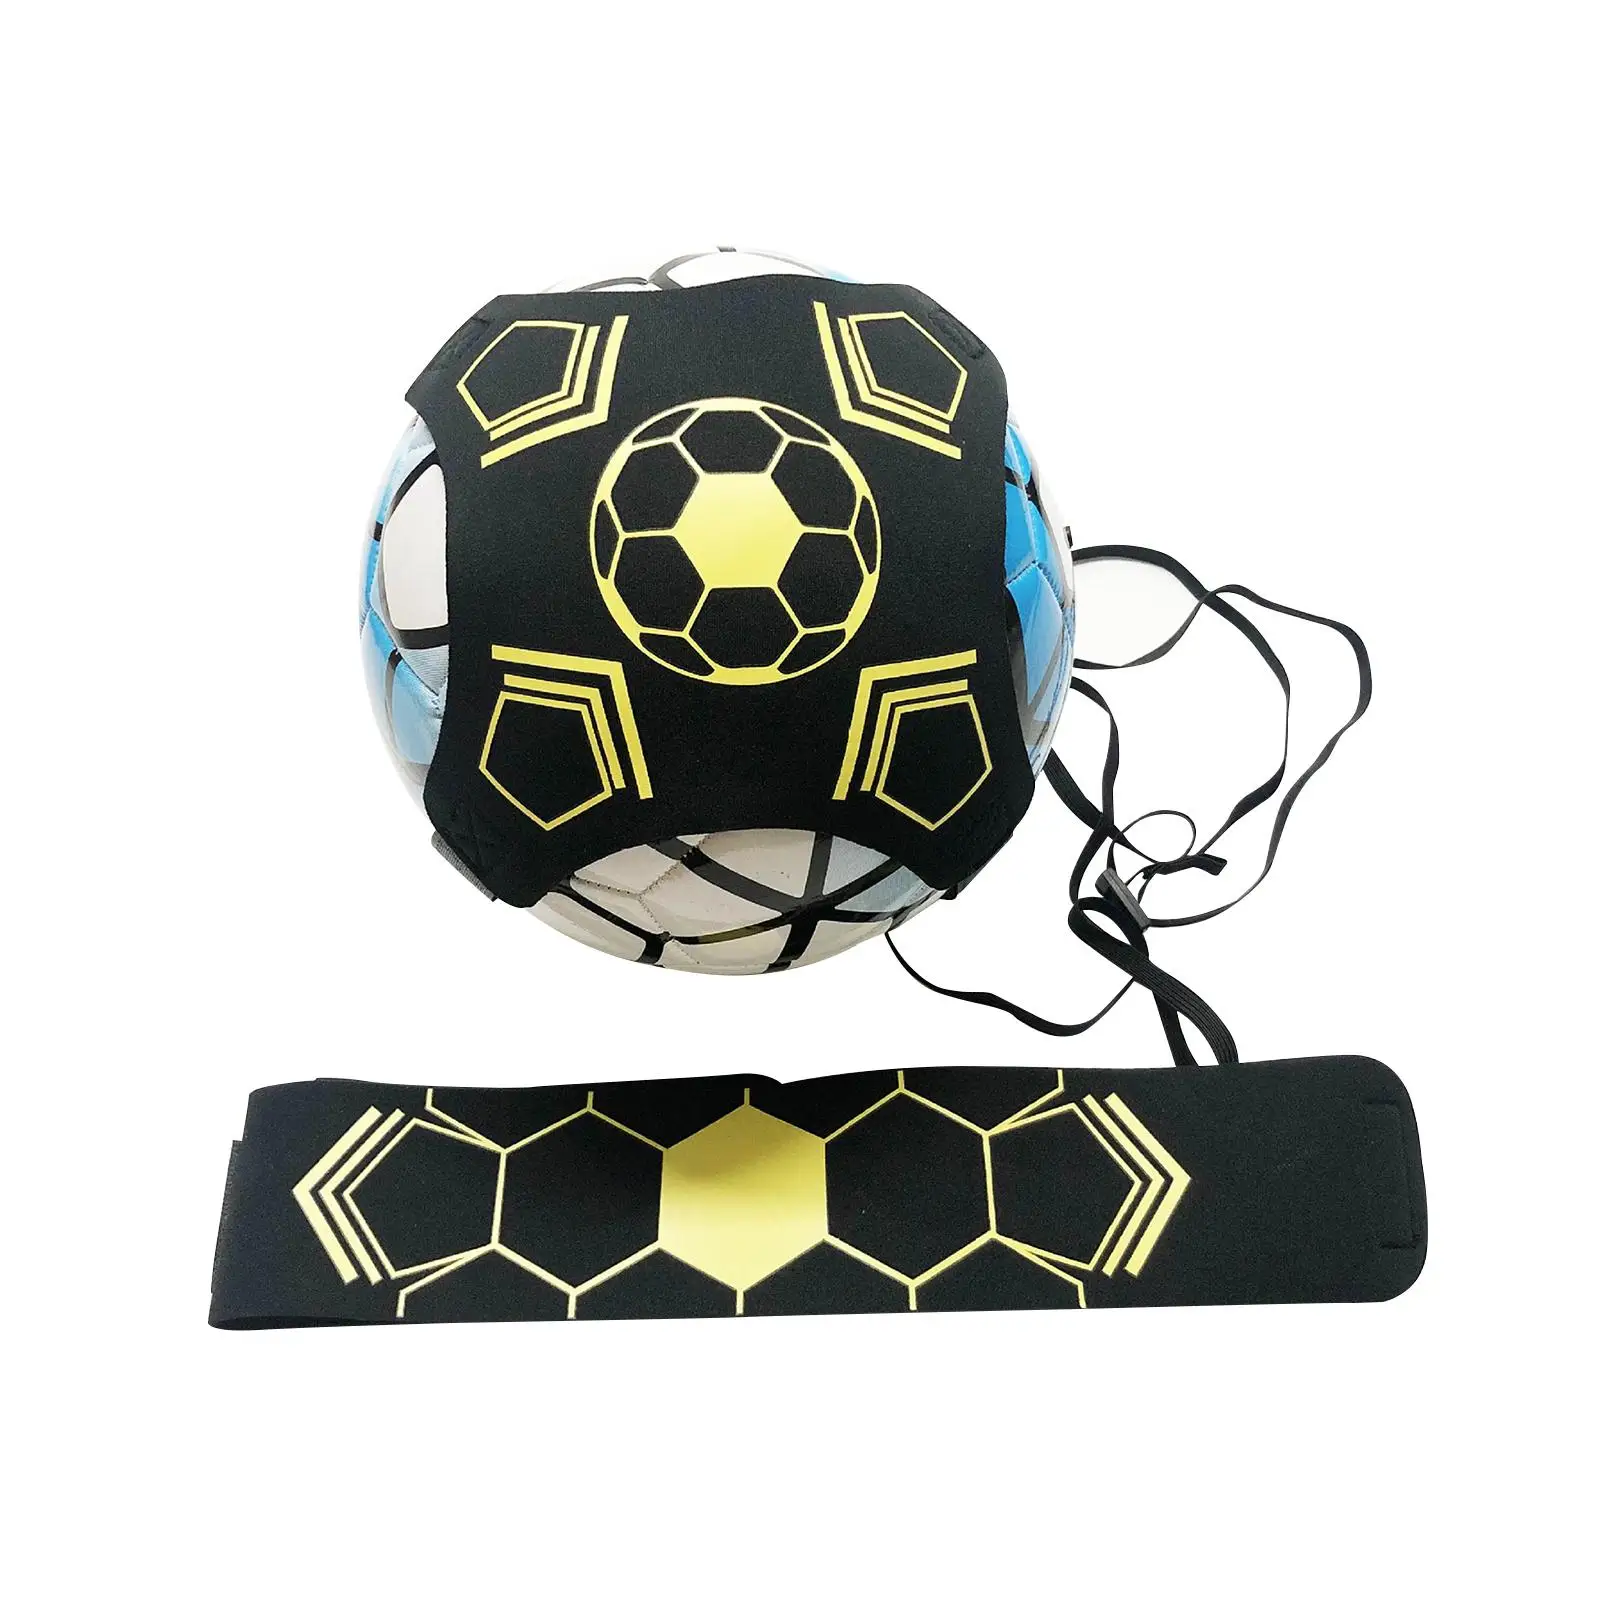 Kick Throw Solo Practice Training Training Aid Adjustable Waist Belt 1.8M Elastic Rope Football Soccer Trainer for Outdoor Rugby